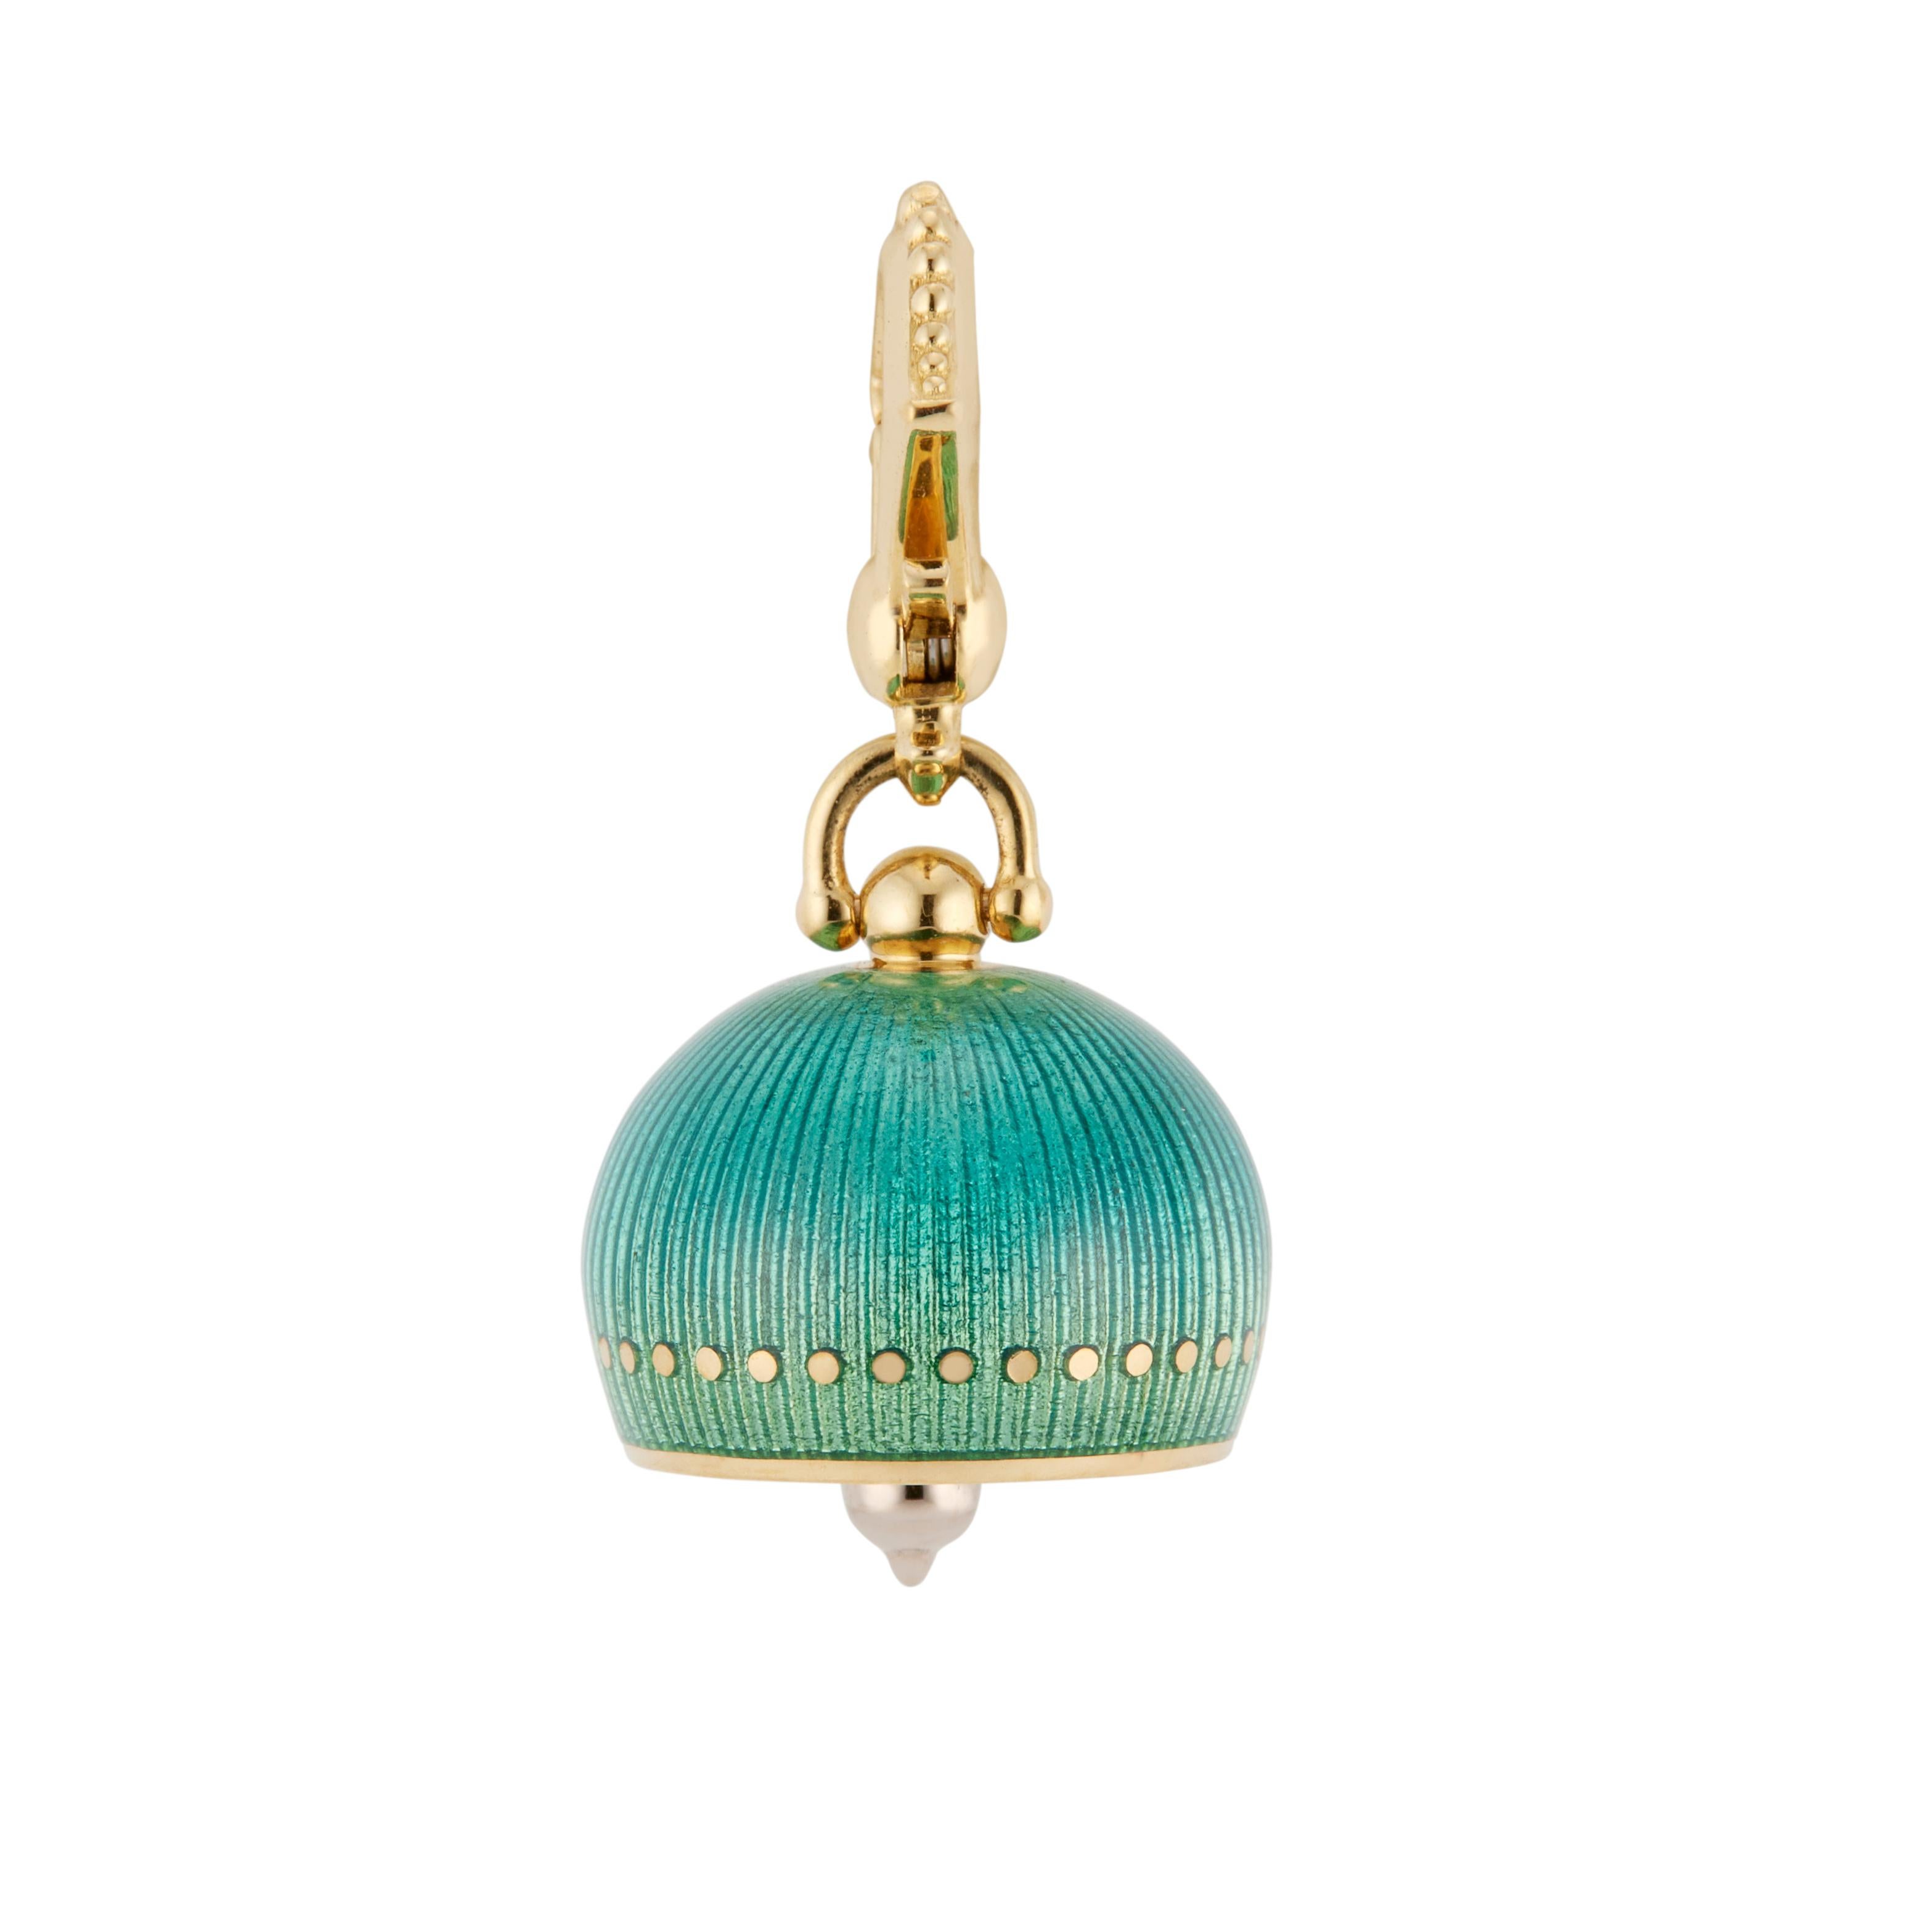 Solid 18k yellow gold and green enamel meditation bell, featuring a functioning white gold clapper by Paul Morelli.

18k yellow gold 
18k white gold 
Stamped: 750
Hallmark: Morelli
7.0 grams
Top to bottom: 28.1mm or 1 1/8 Inch
Width: 14.8mm or .5